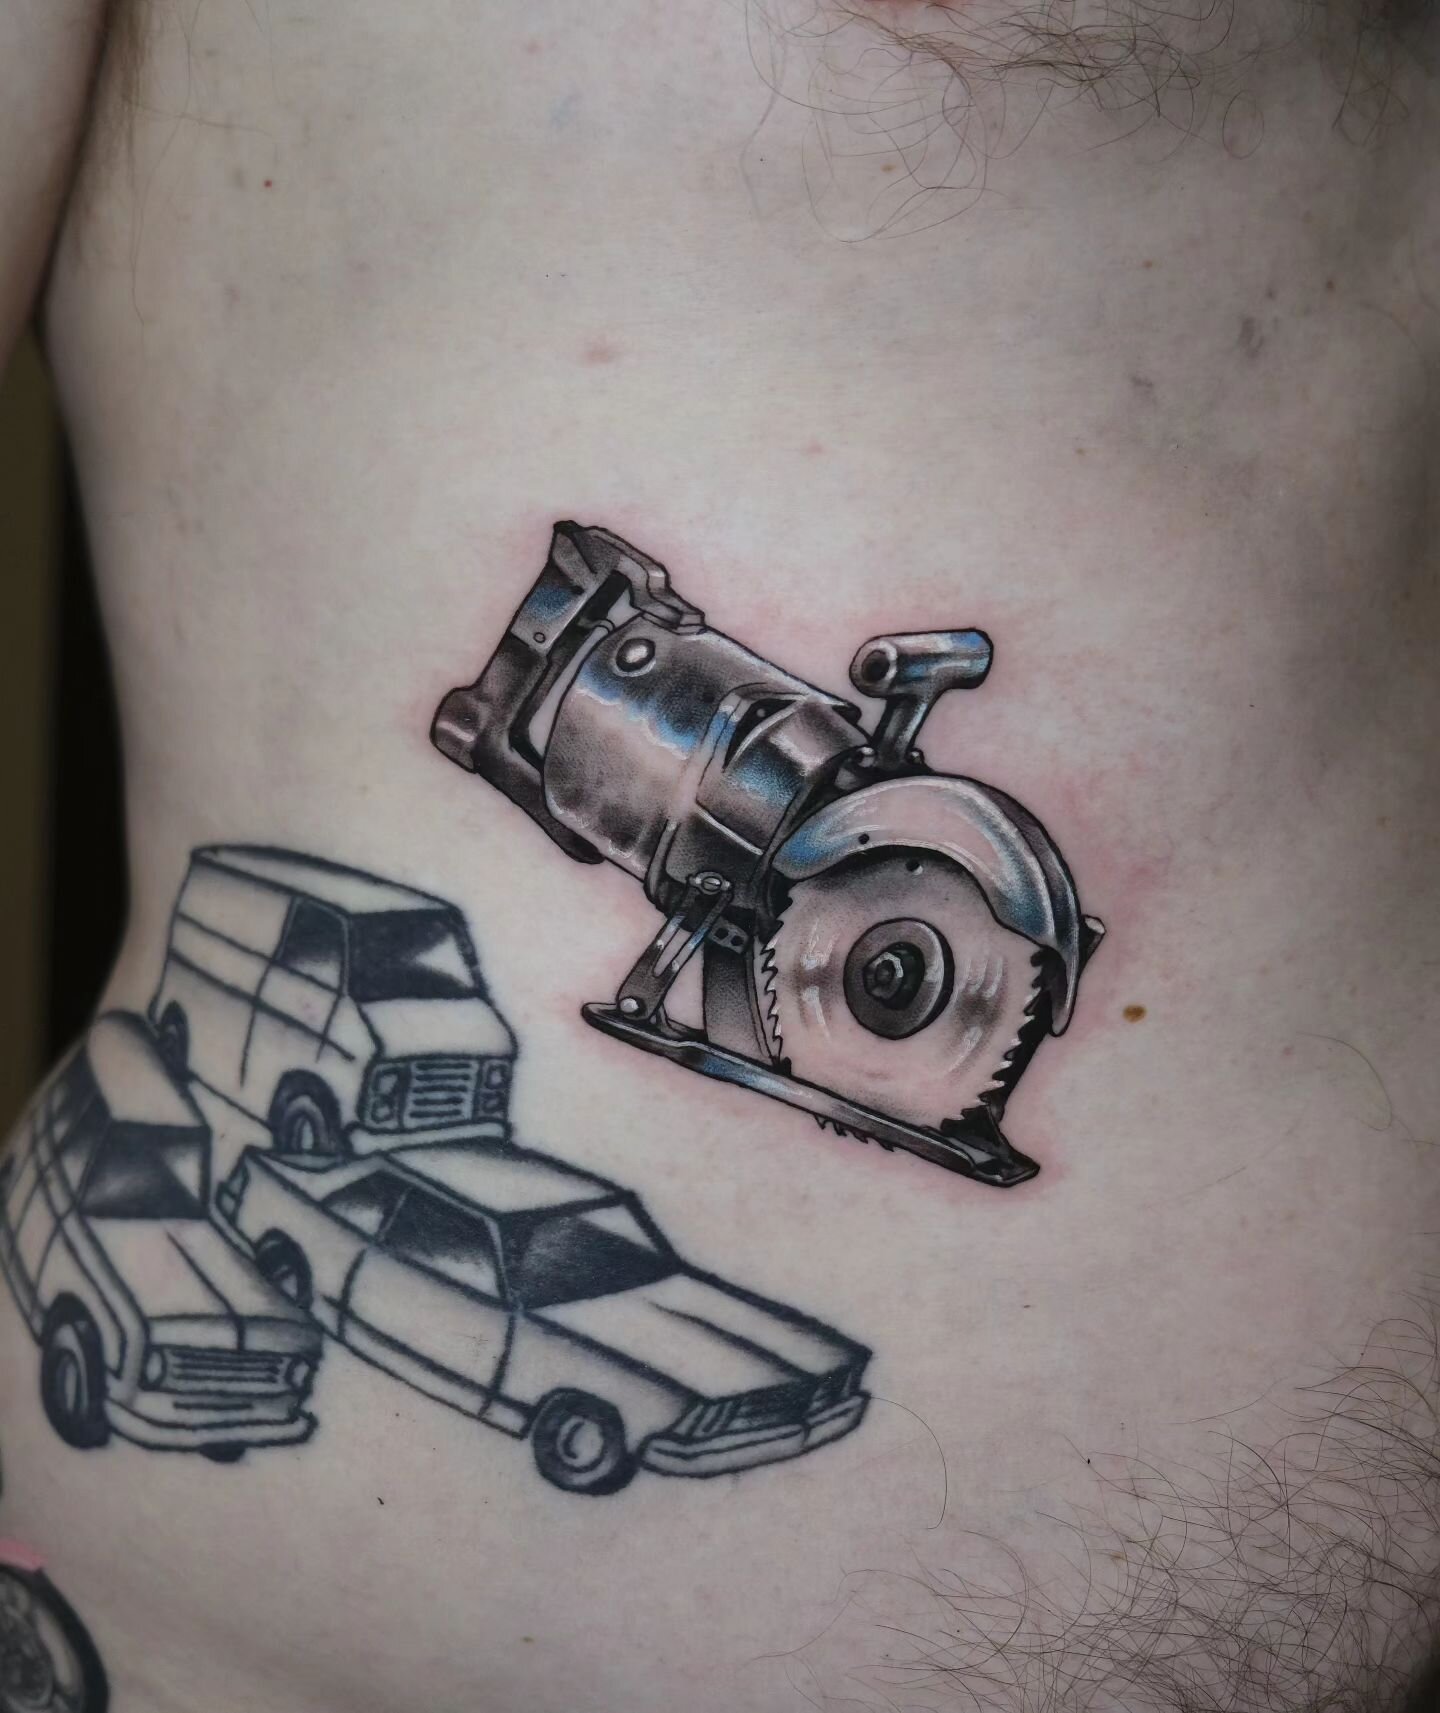 A fun chromey one for @buckharness to start the year off 🪚🪚 I actually love tattooing mechanical things - it's so satisfying!

Thanks for letting me add to your rad collection, Greg, and for the cult documentary recommendations 😂

#toolsofthetrade